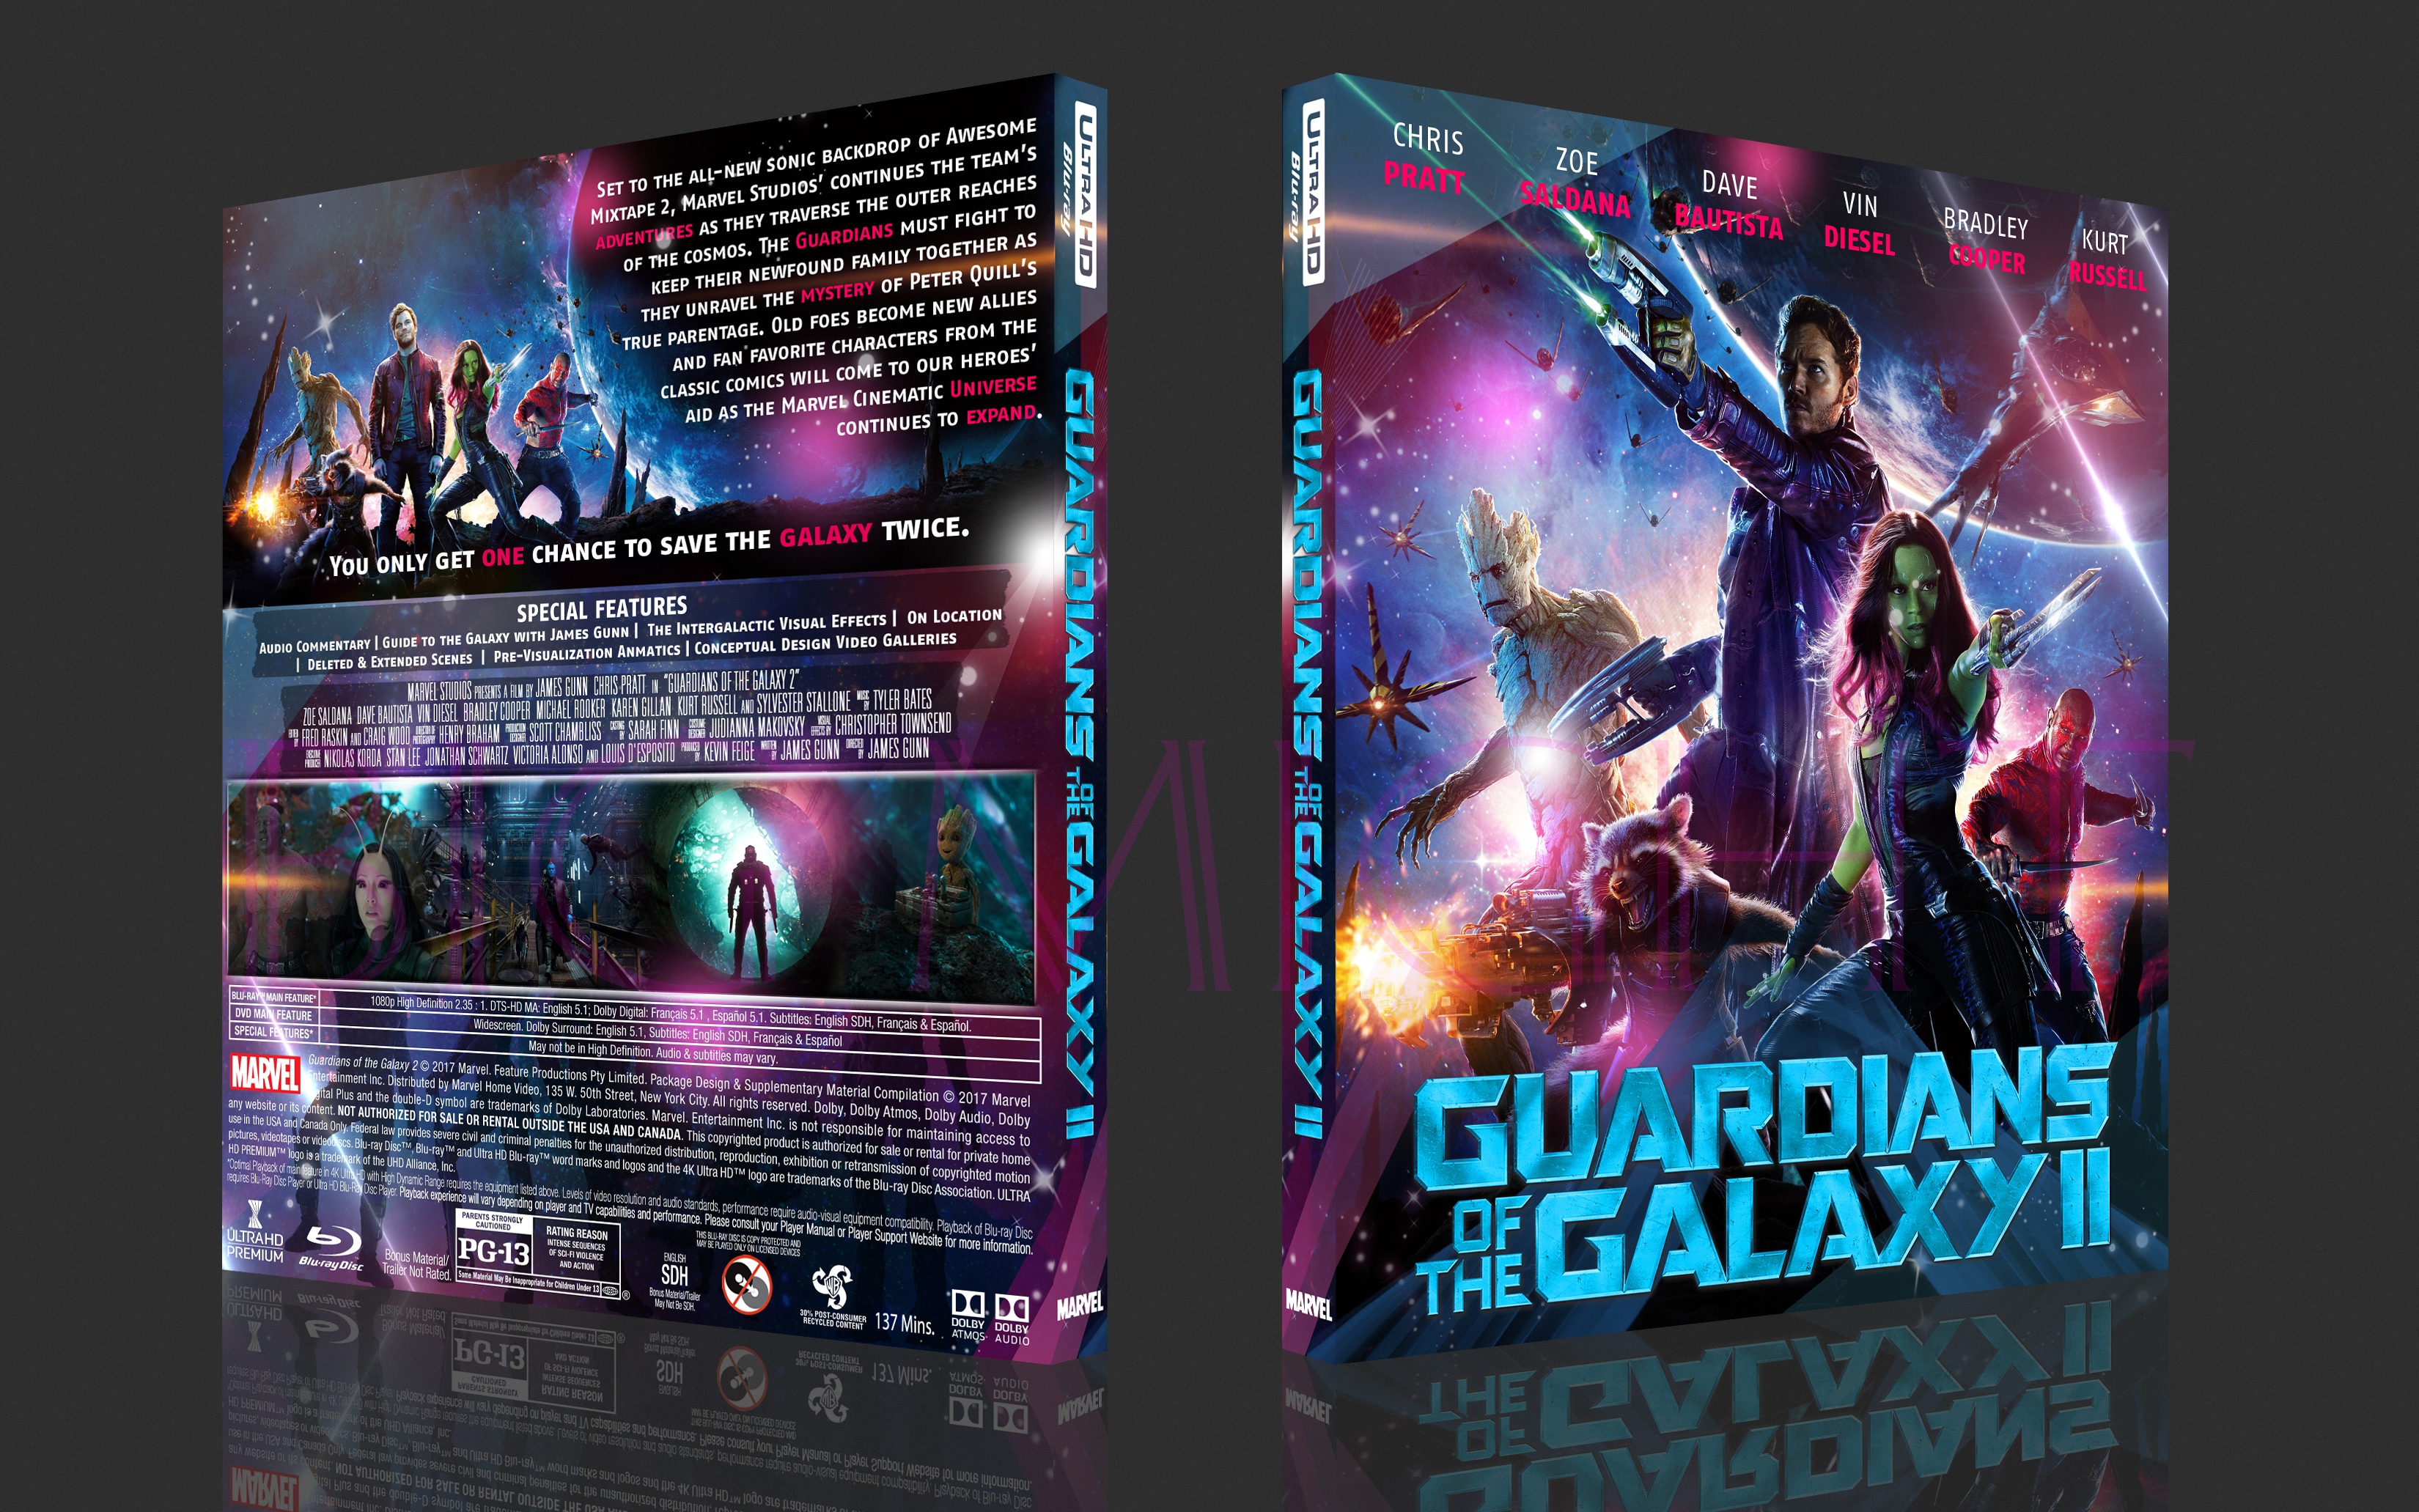 Guardians of the Galaxy 2 box cover